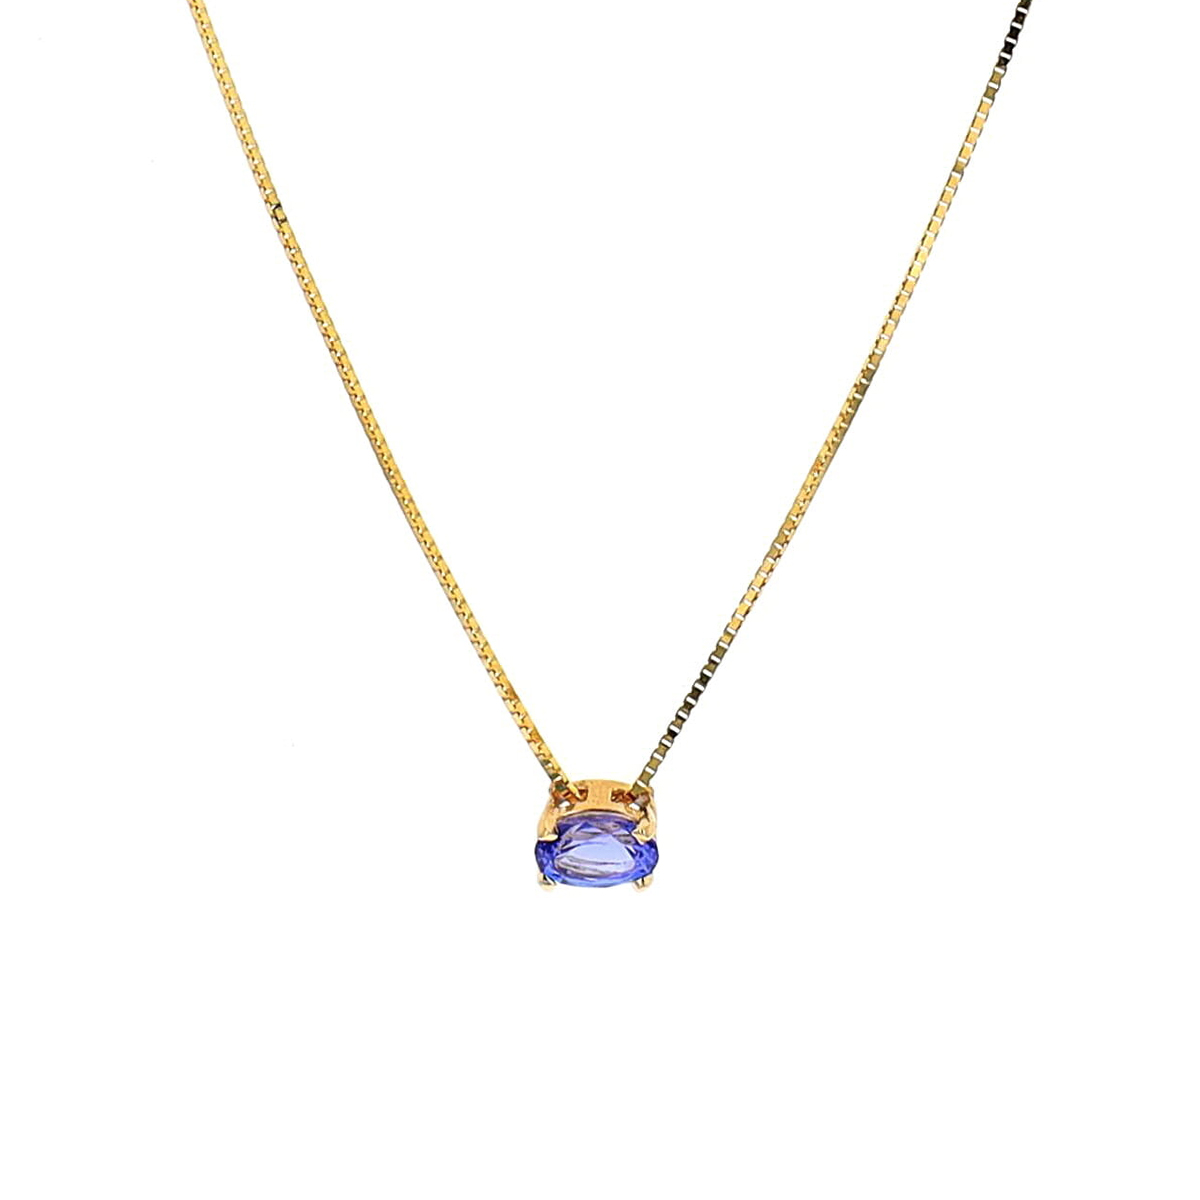 14K Yellow Gold Oval Tanzanite Pendant with Chain